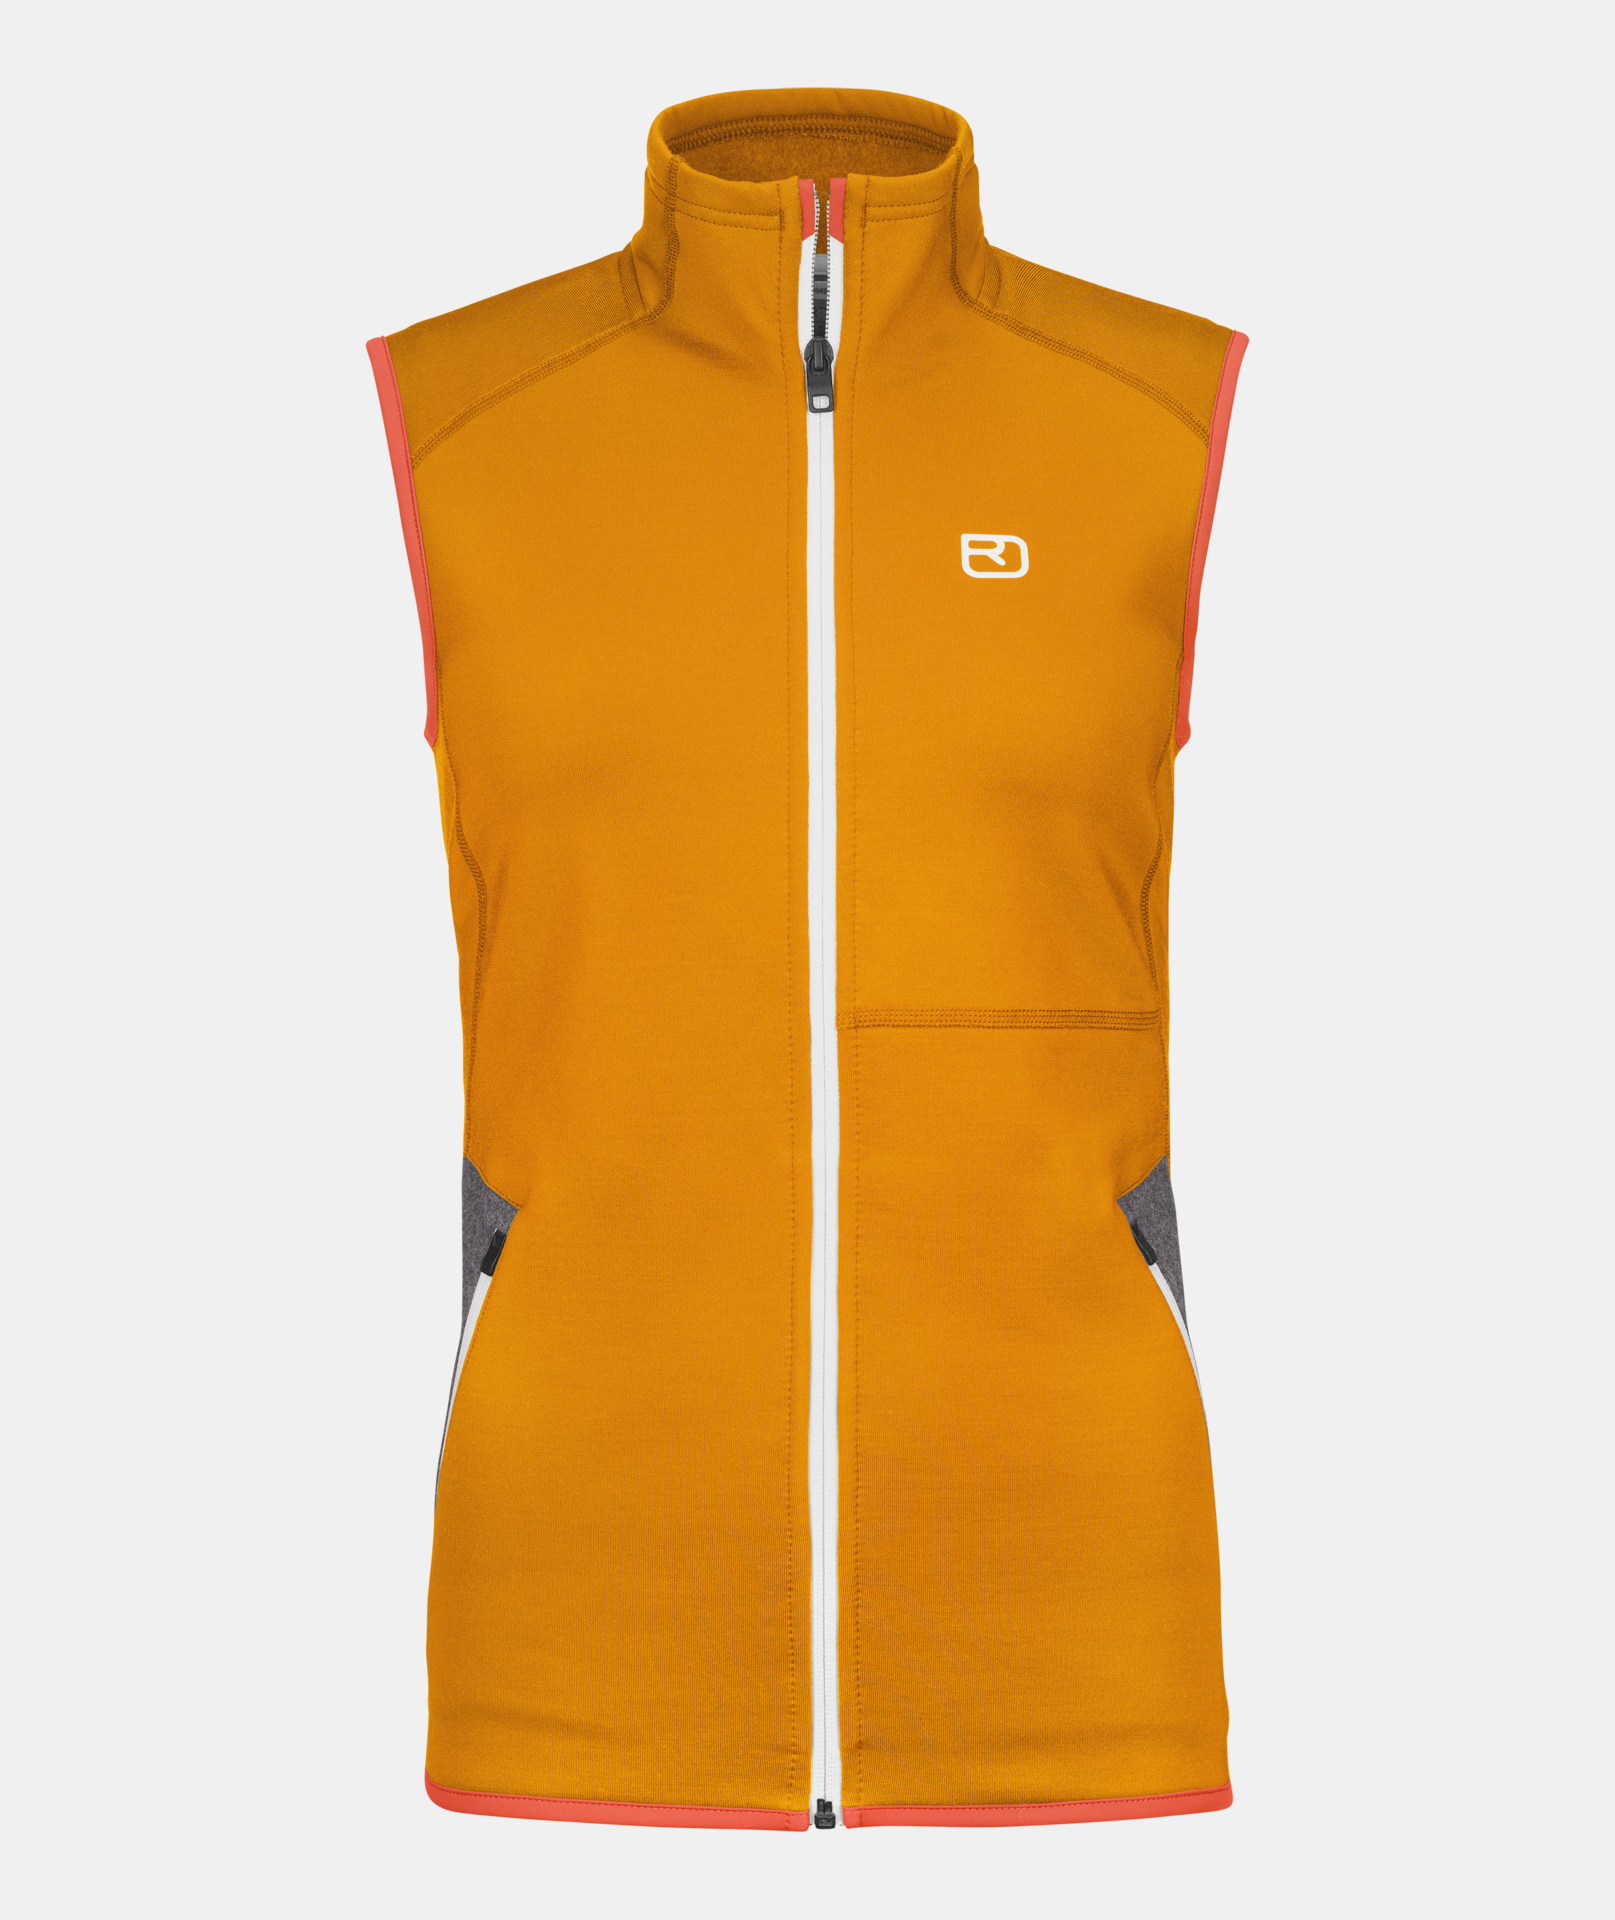 https://dxtb1rh8tbbvs.cloudfront.net/cache-buster-11709941304/ORTOVOX/mediaroom/Product%20Images/Women/Mountainwear/Jackets%20-%20Vests/Vests/184559/image-thumb__184559__ortovox-lightbox-img_png/86978-21501-FLEECE_VEST_W_autumn_leaves-B-01.png